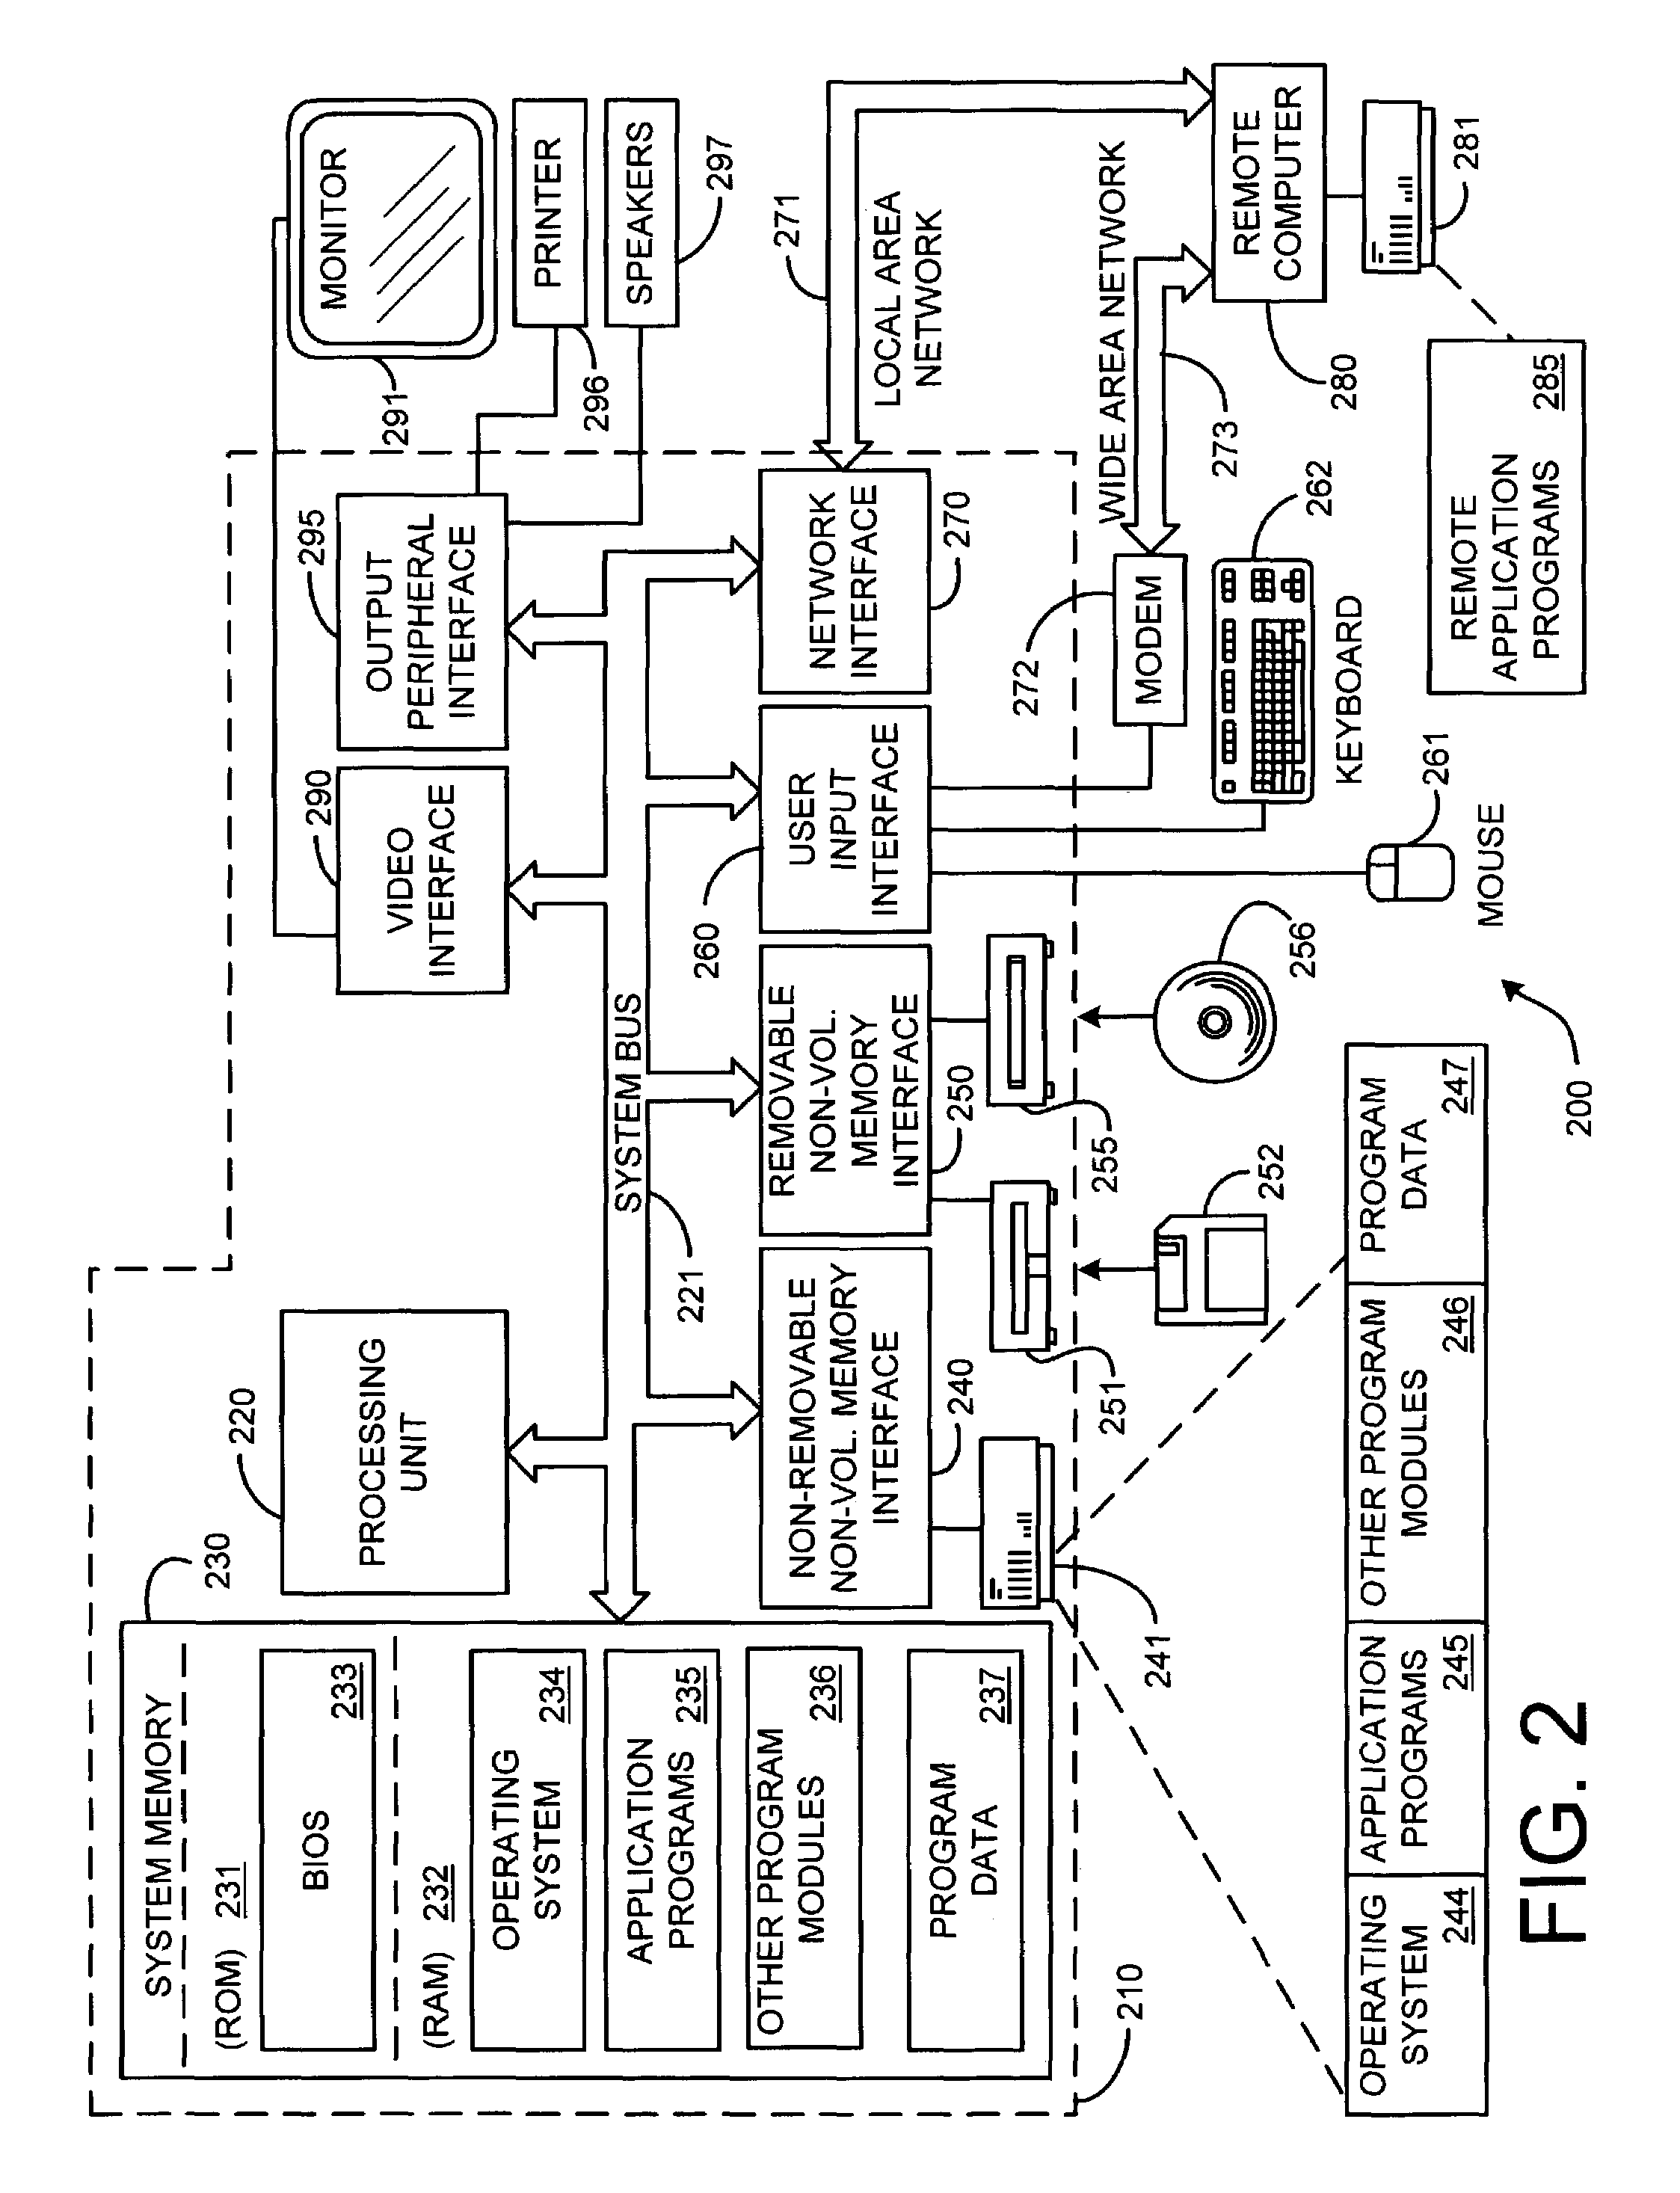 Method and system for extracting key frames from video using a triangle model of motion based on perceived motion energy